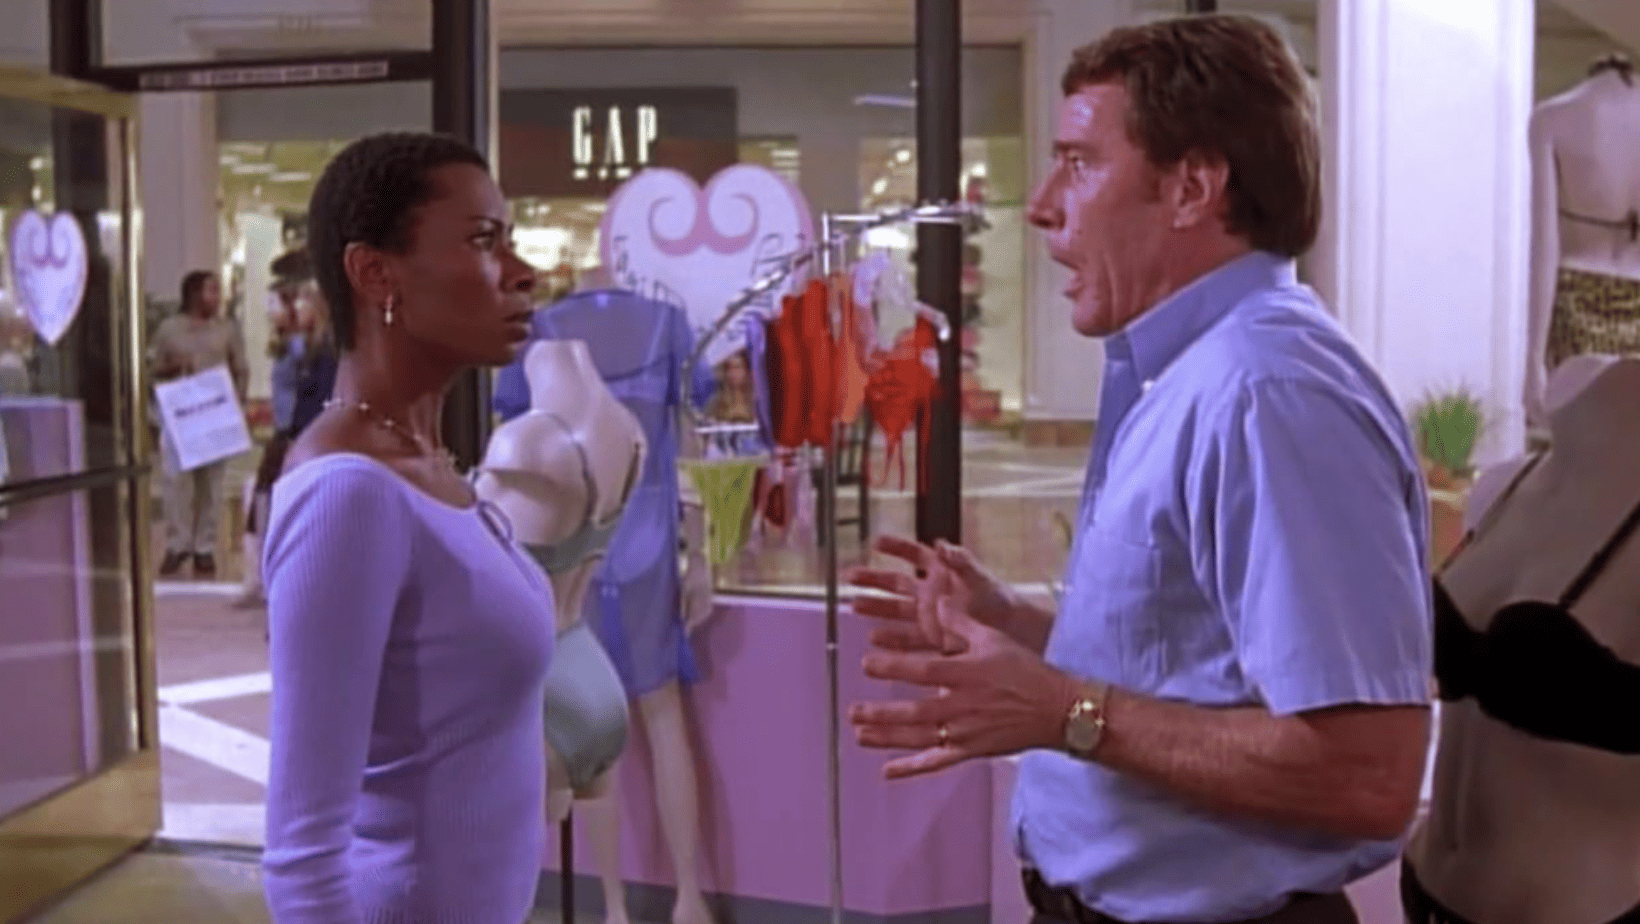 A frantic man speaks to a mall shop employee in this image from Satin City Productions.